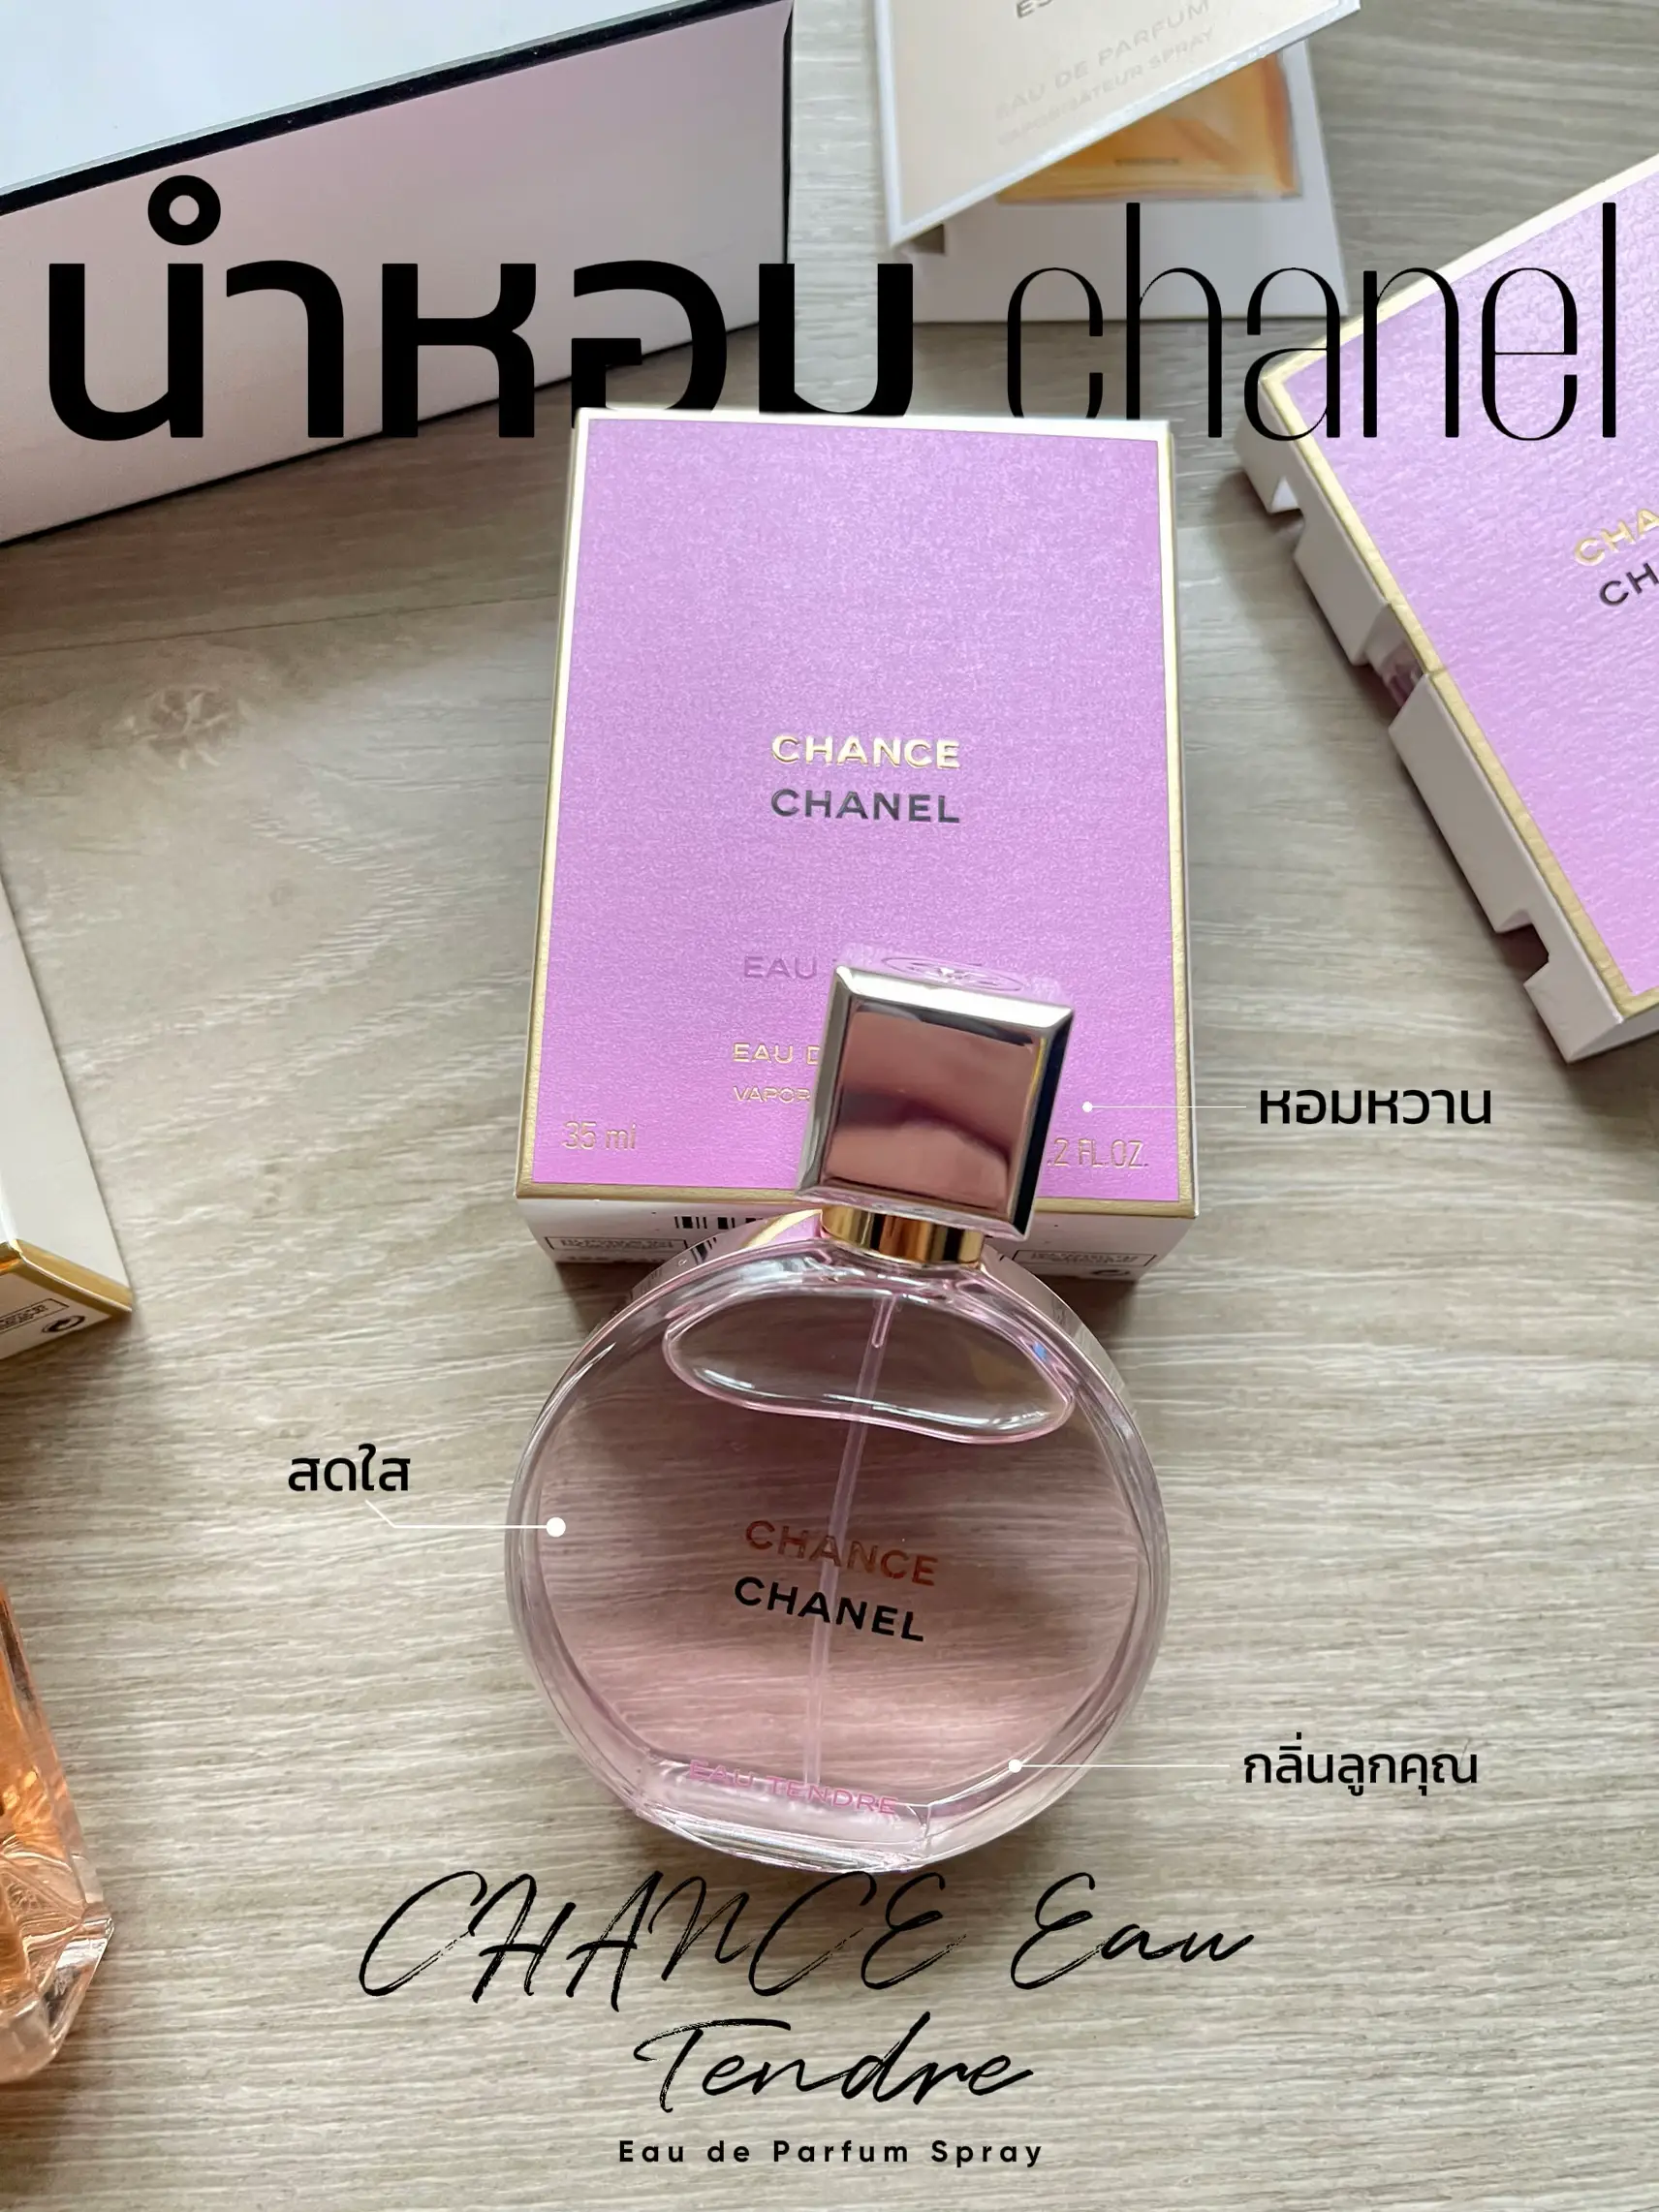 Your child's scent chanel perfume review🤍, Gallery posted by Iceni